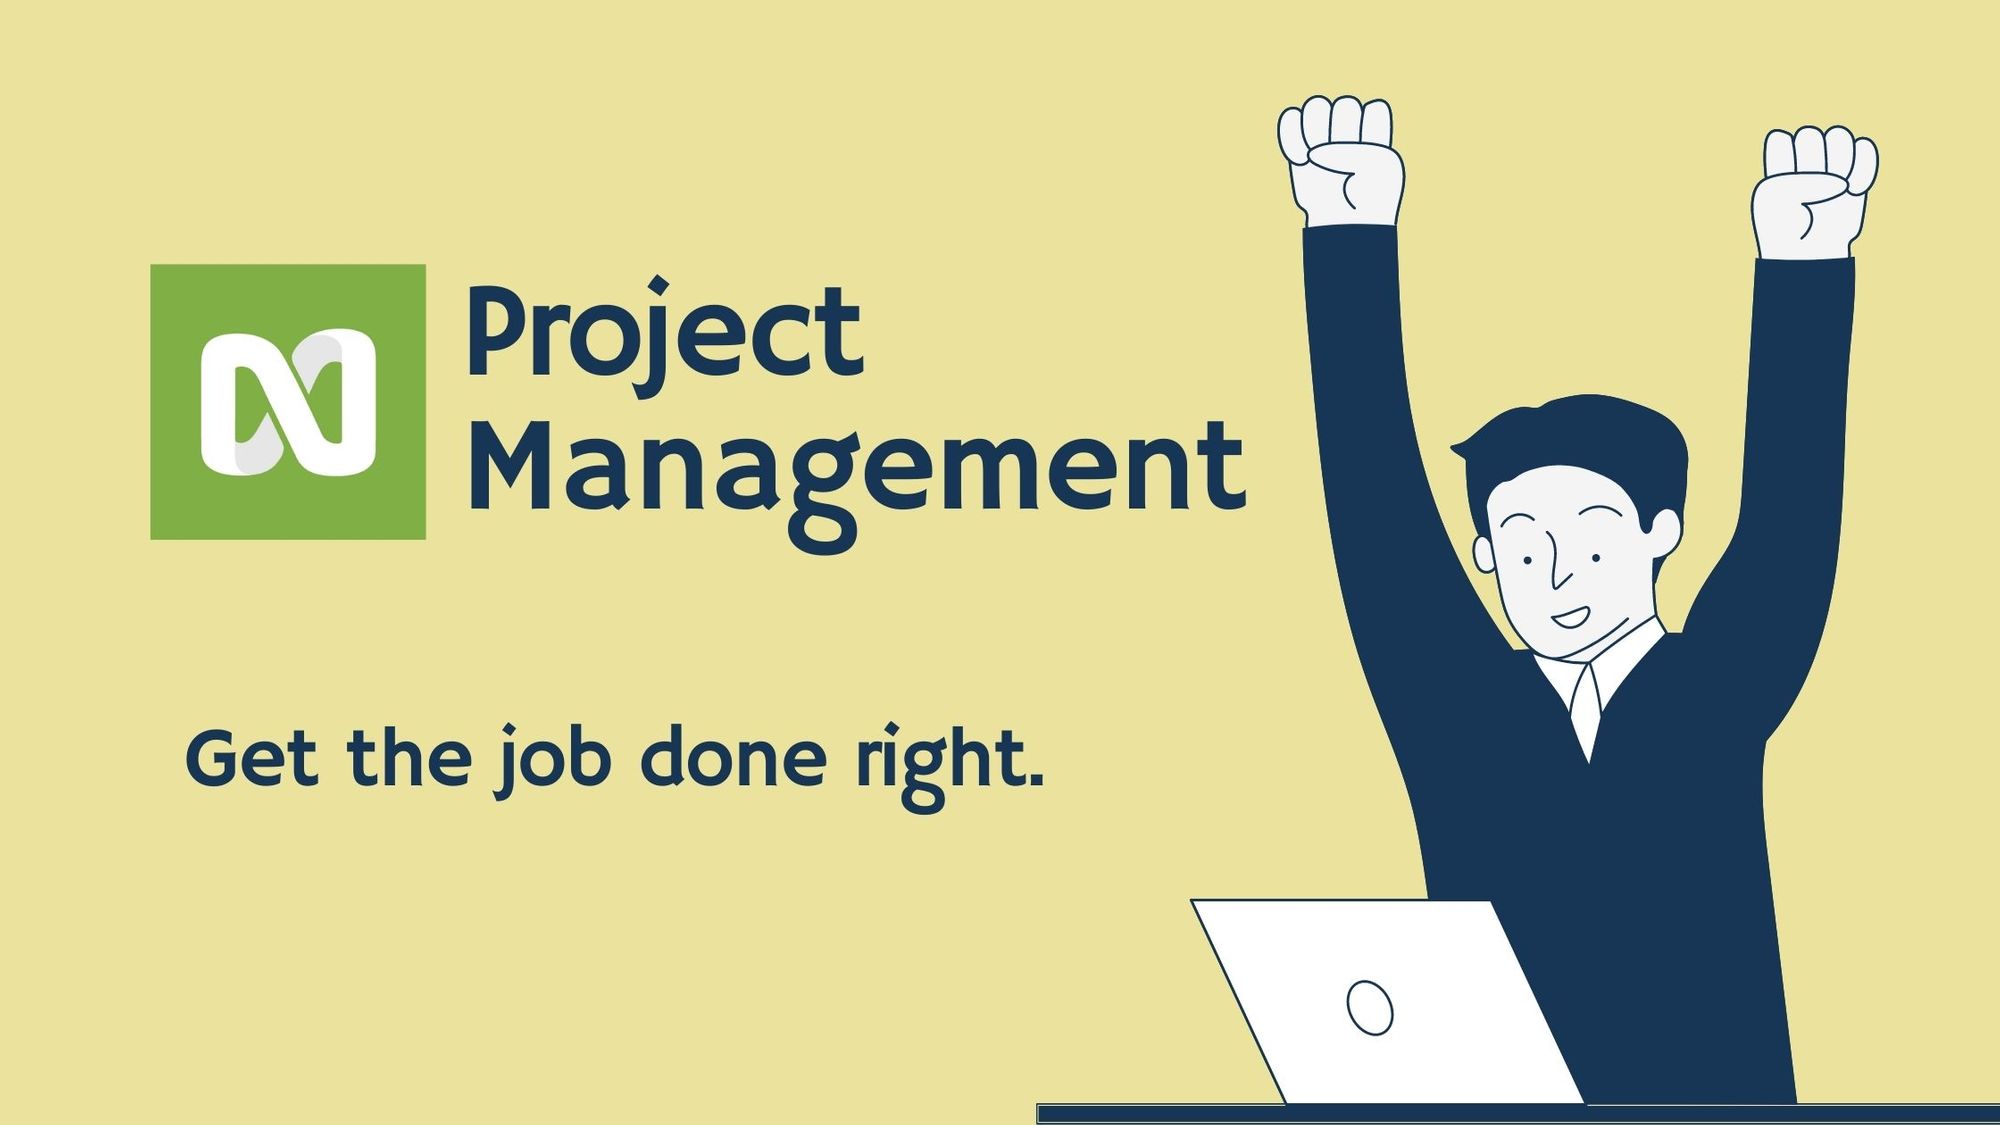 nTask - The Clever Tool for Project Management with Great Features You Need